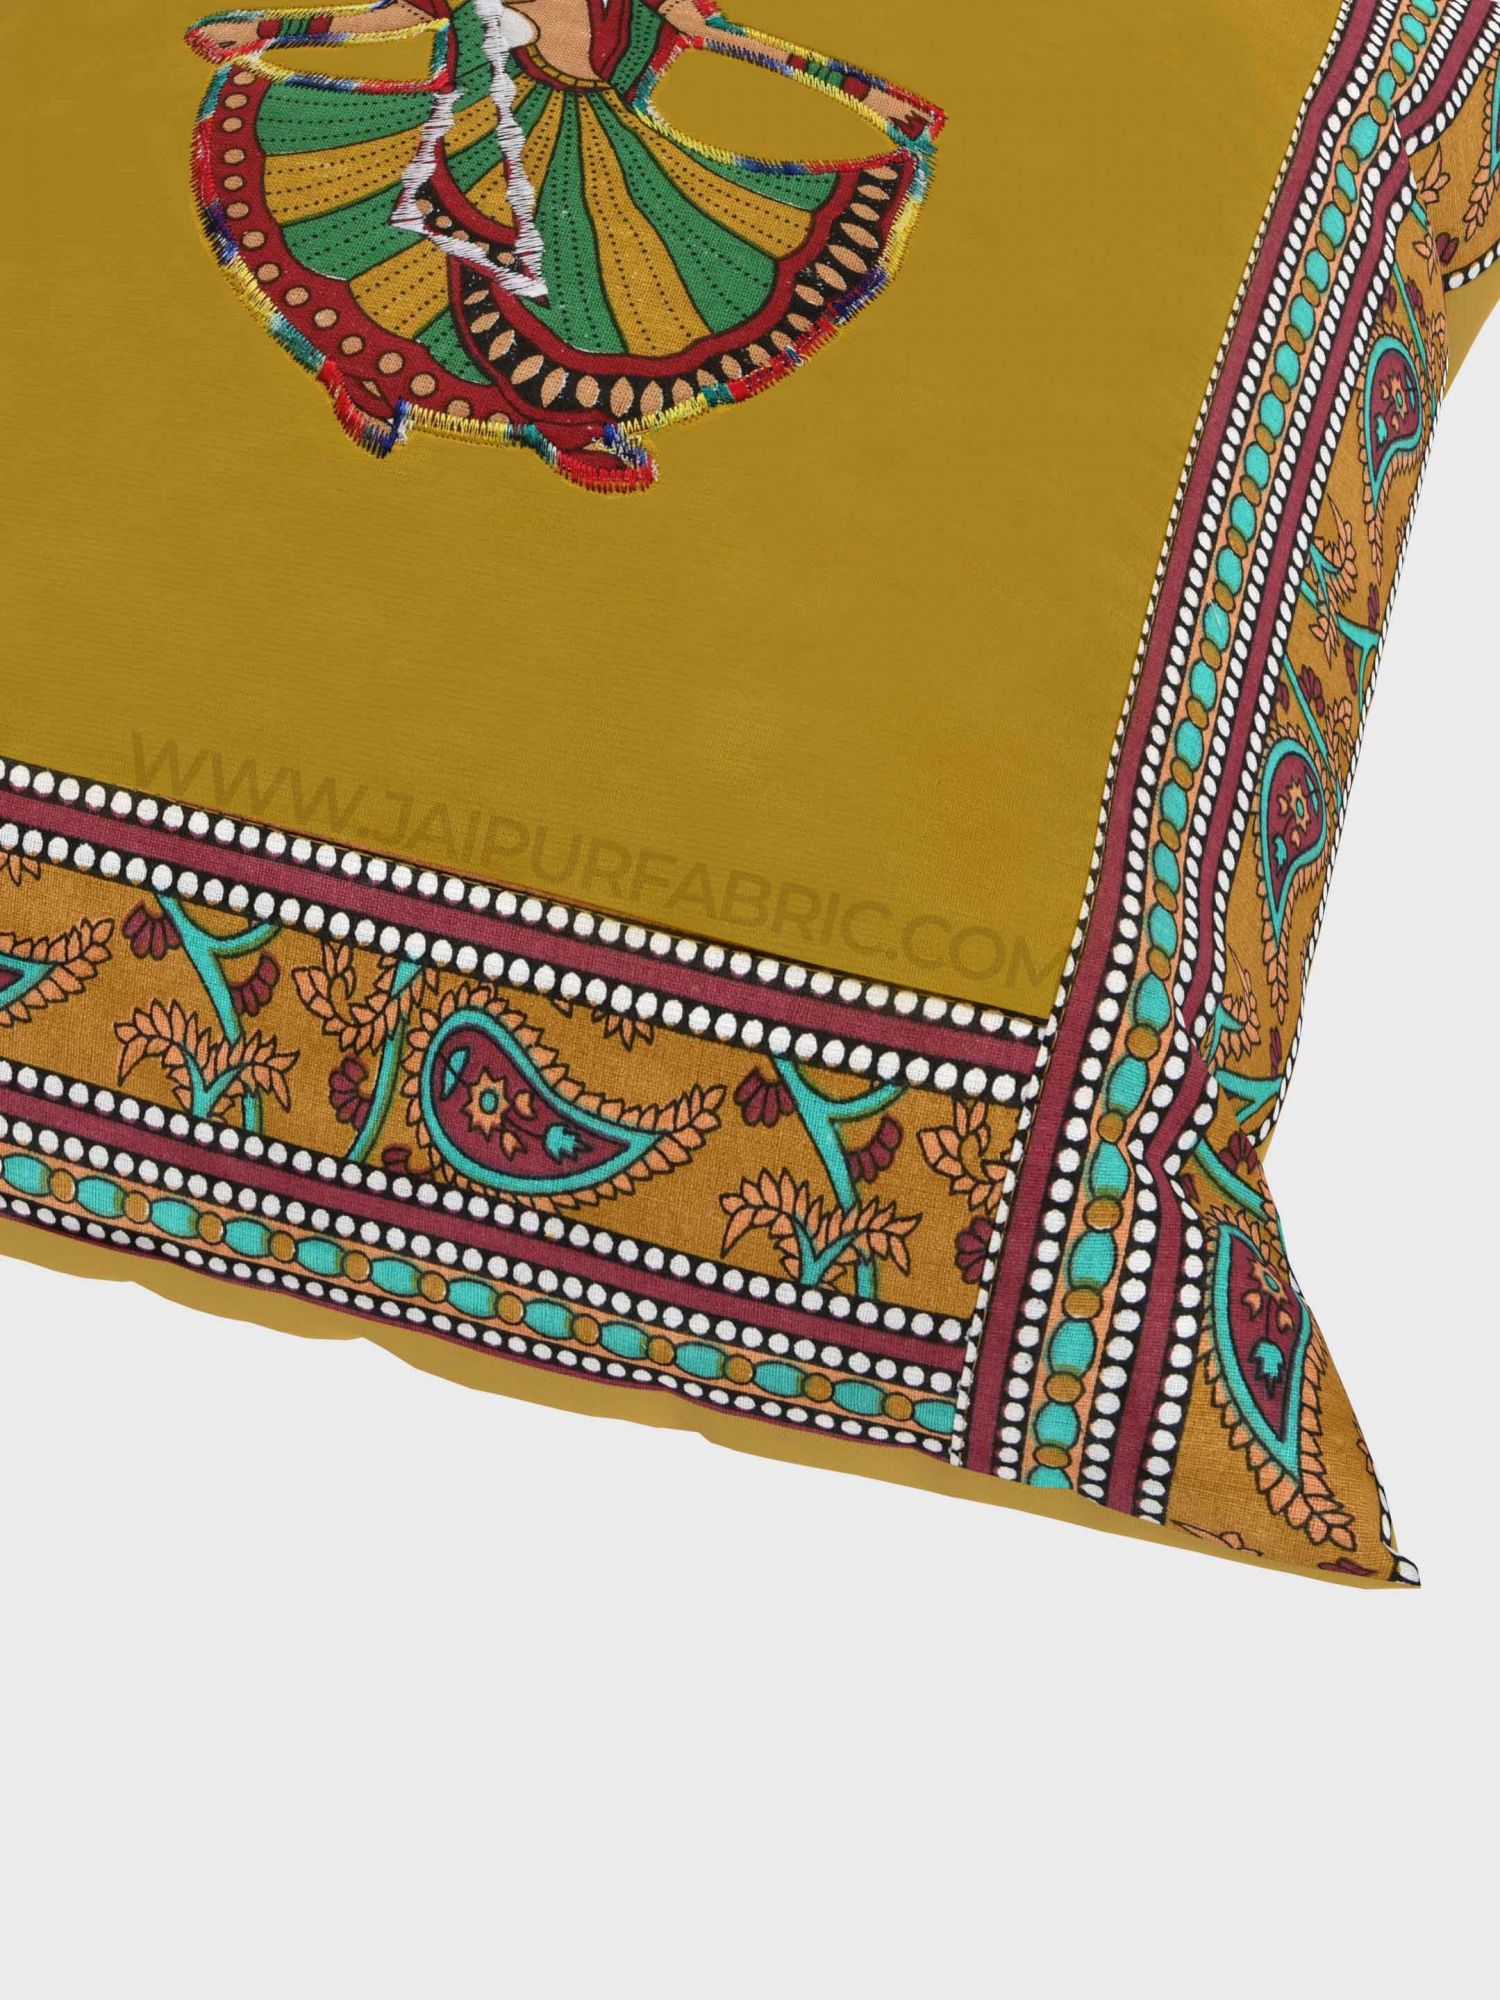 Applique Mehandi Green Gujri Jaipuri Hand Made Embroidery Patch Work Cushion Cover